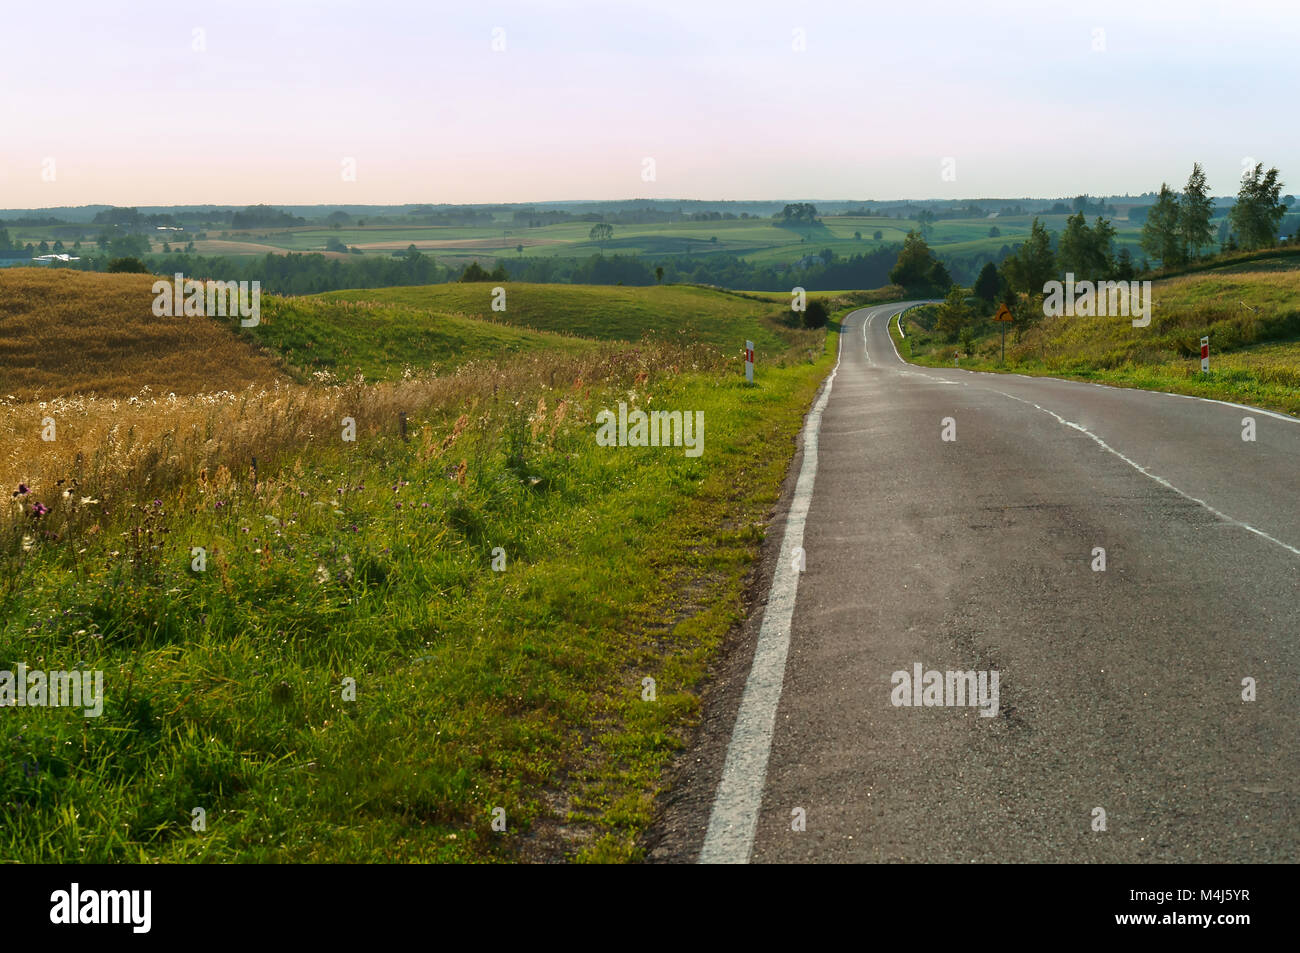 the endless path of descents and ascents in the road, a long road in the journey Stock Photo